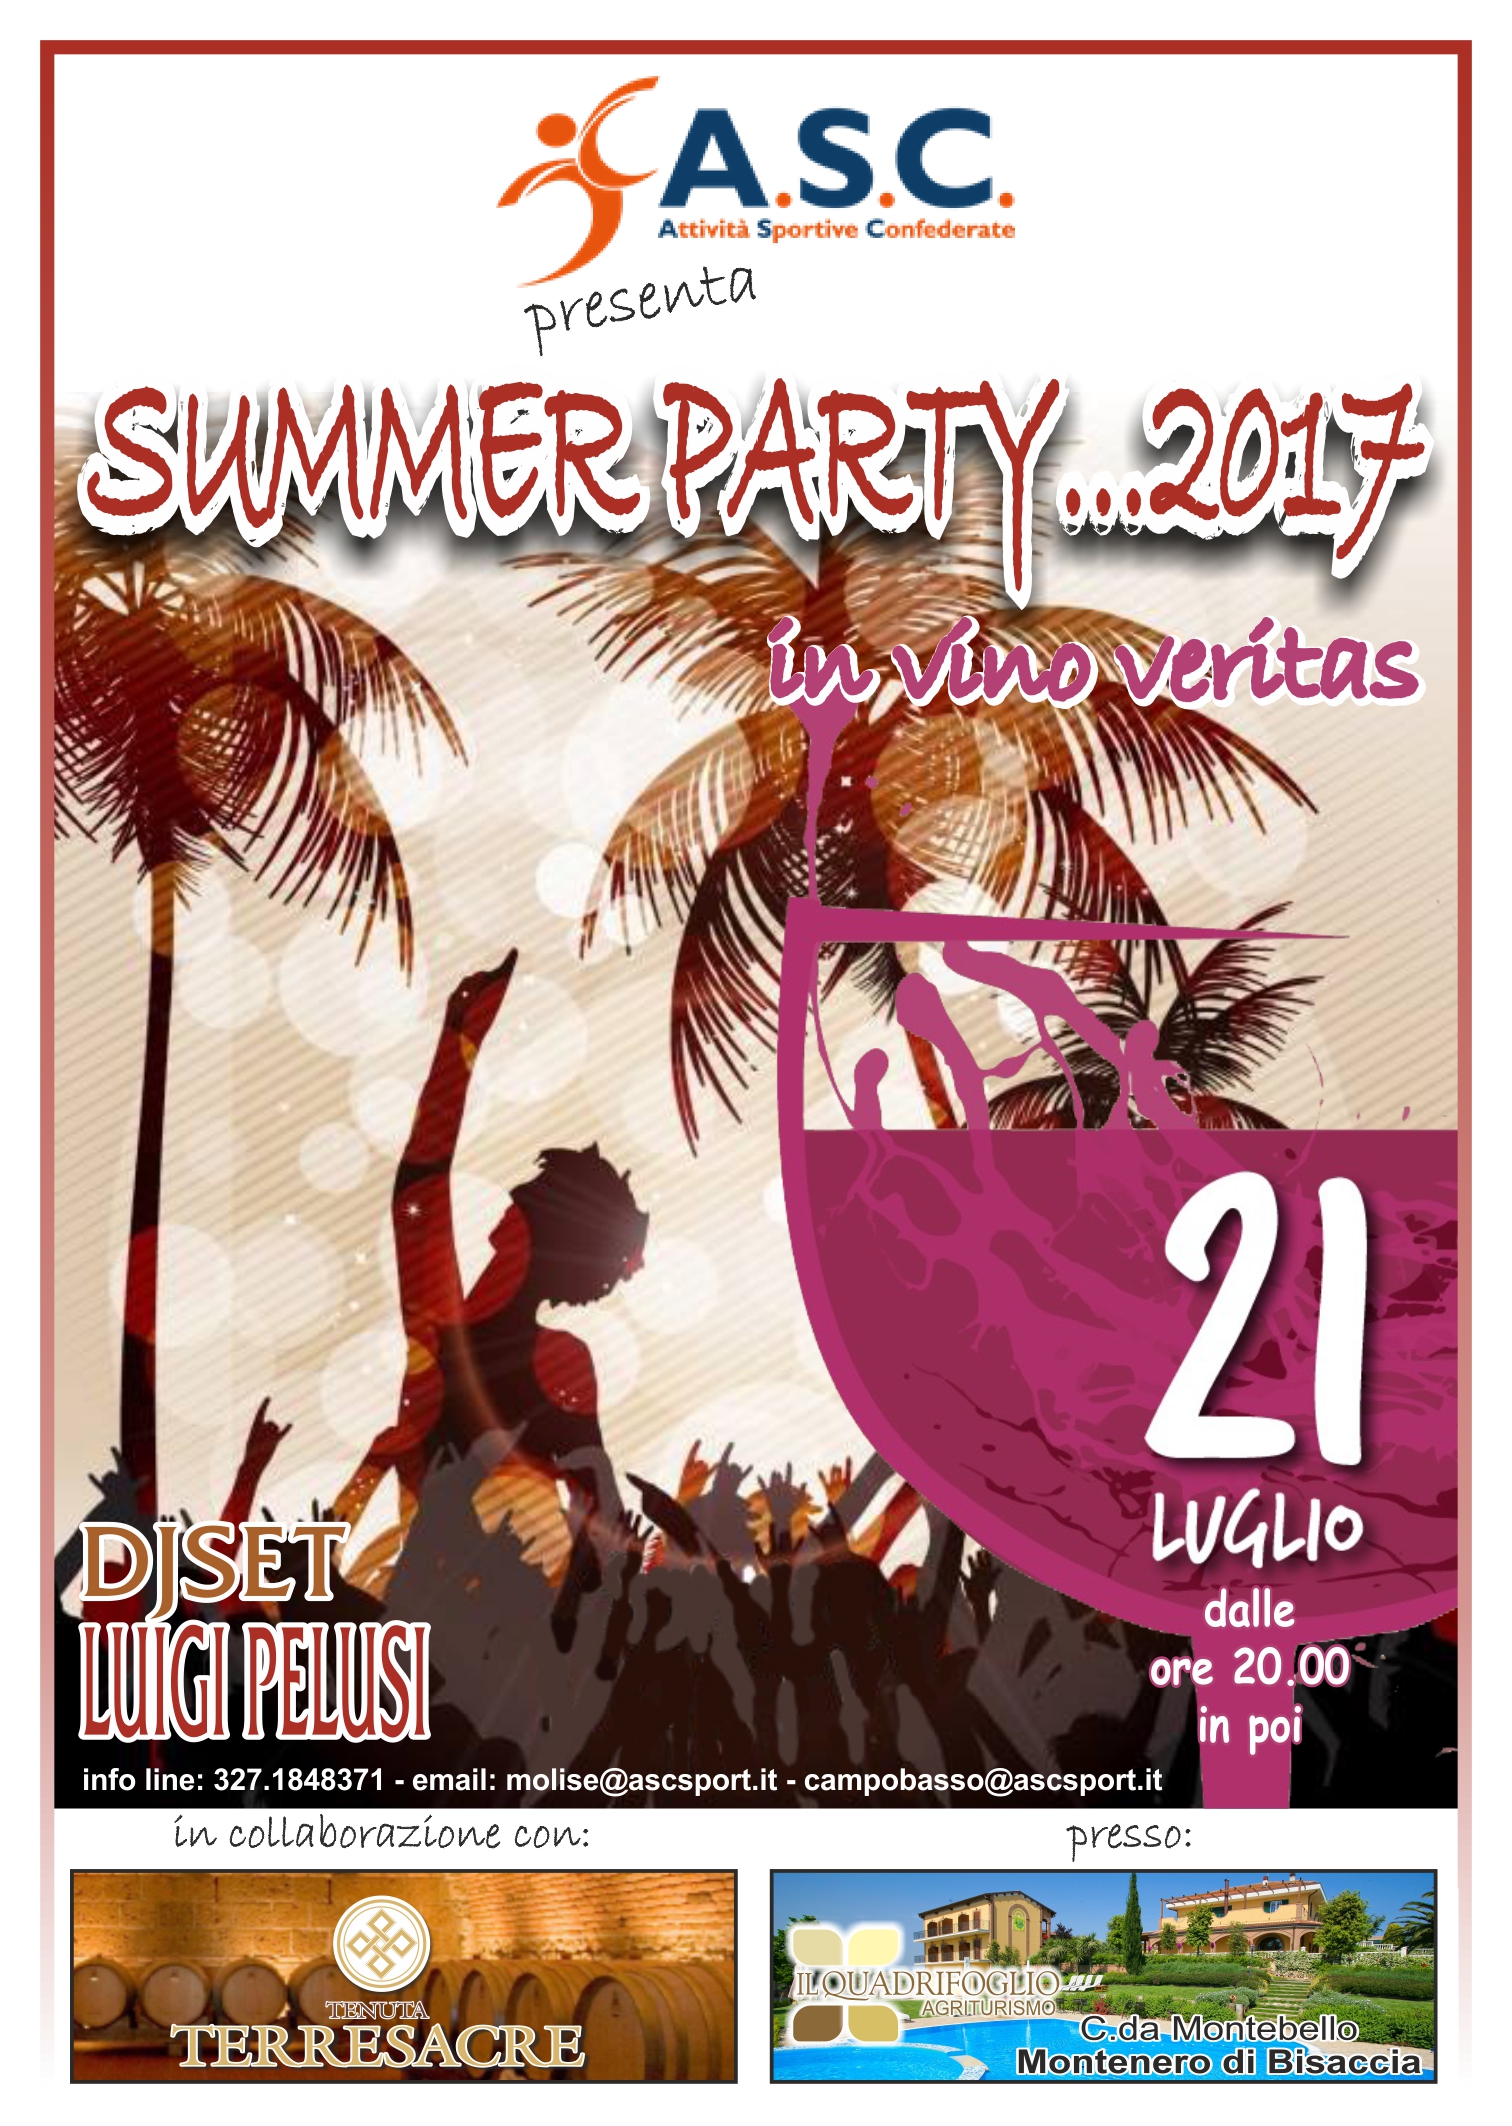 SUMMER PARTY 2017 A S C 